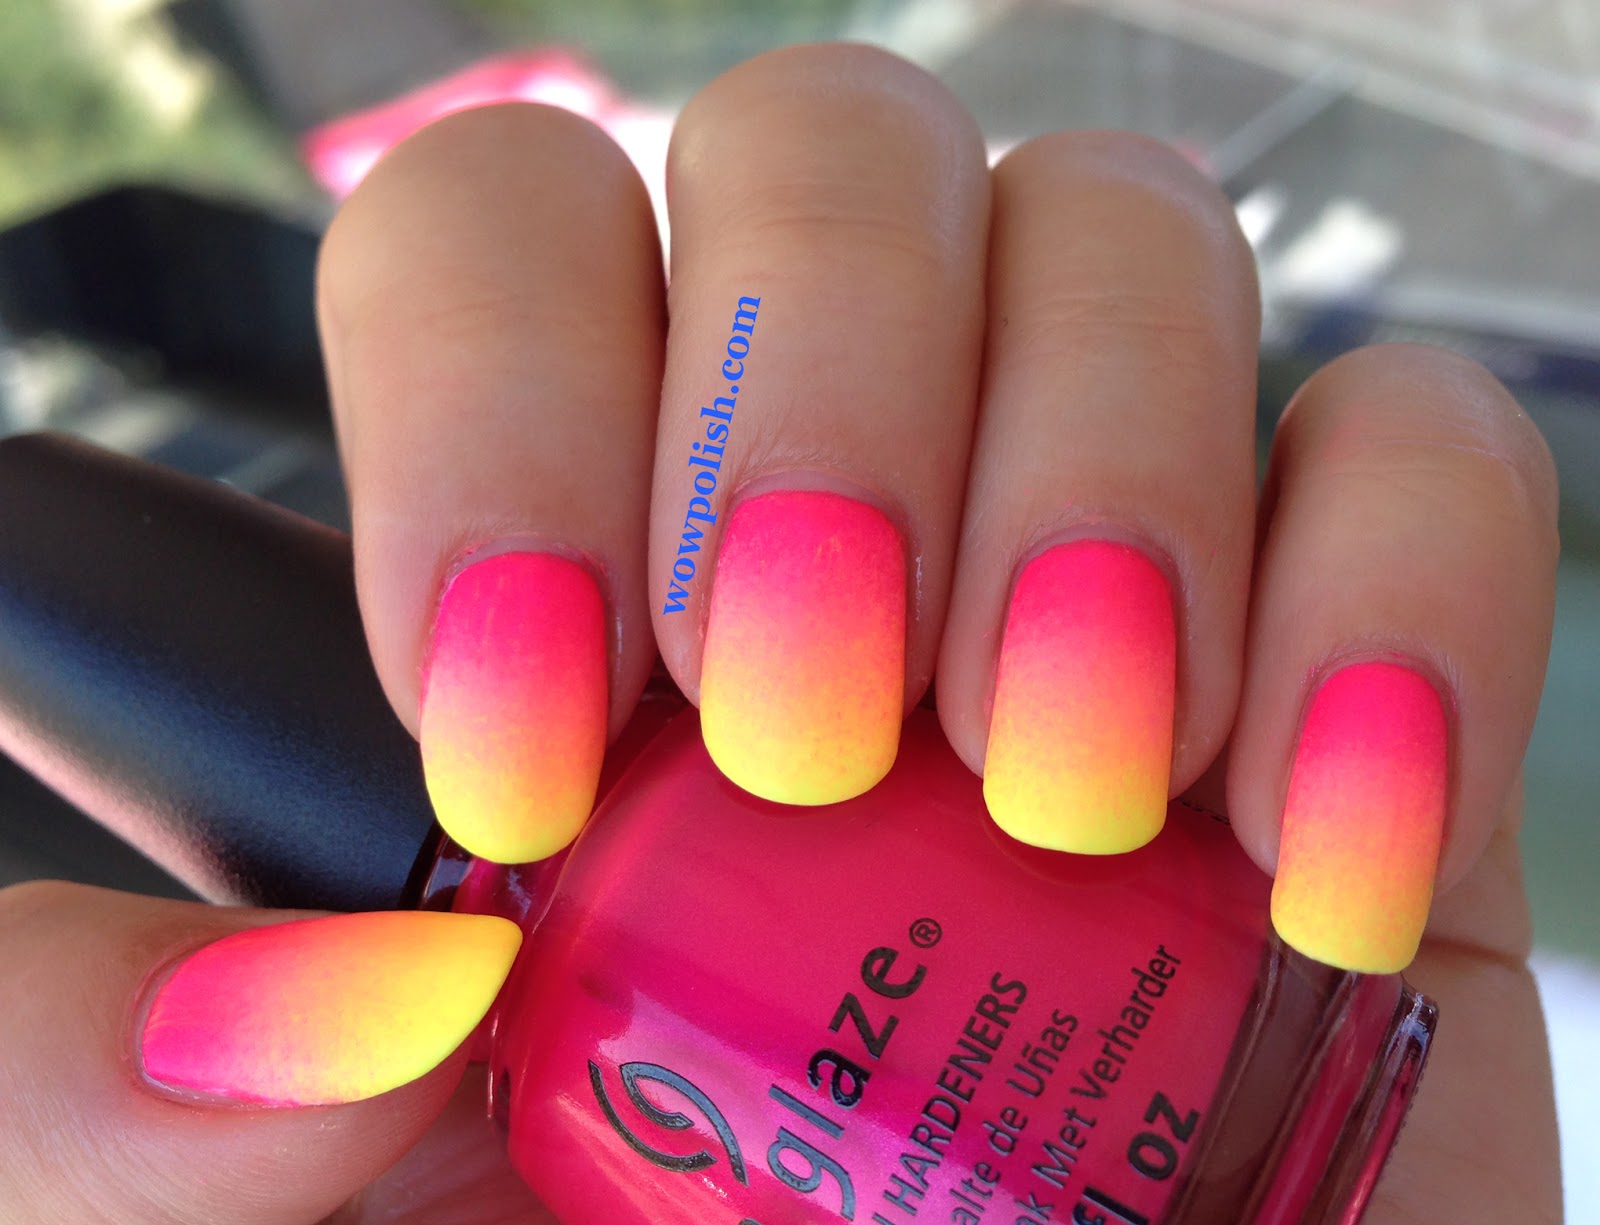 8. Neon Peach Acrylic Nails with Negative Space Design - wide 7